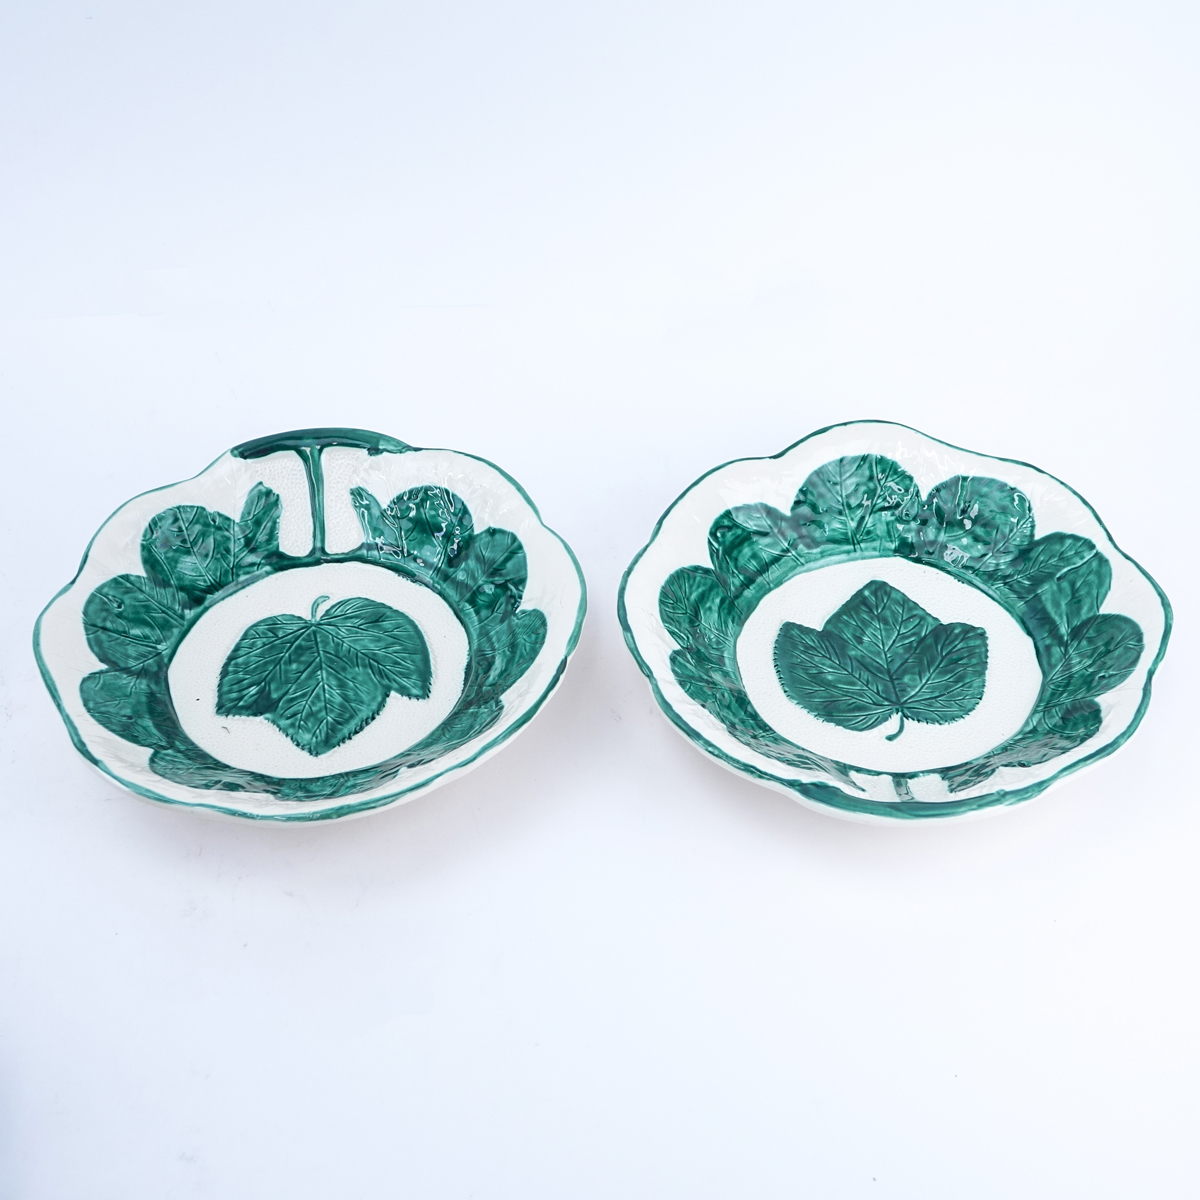 Six (6) Pieces Modern Majolica Style Pottery Bowls. Includes various leaf motifs.